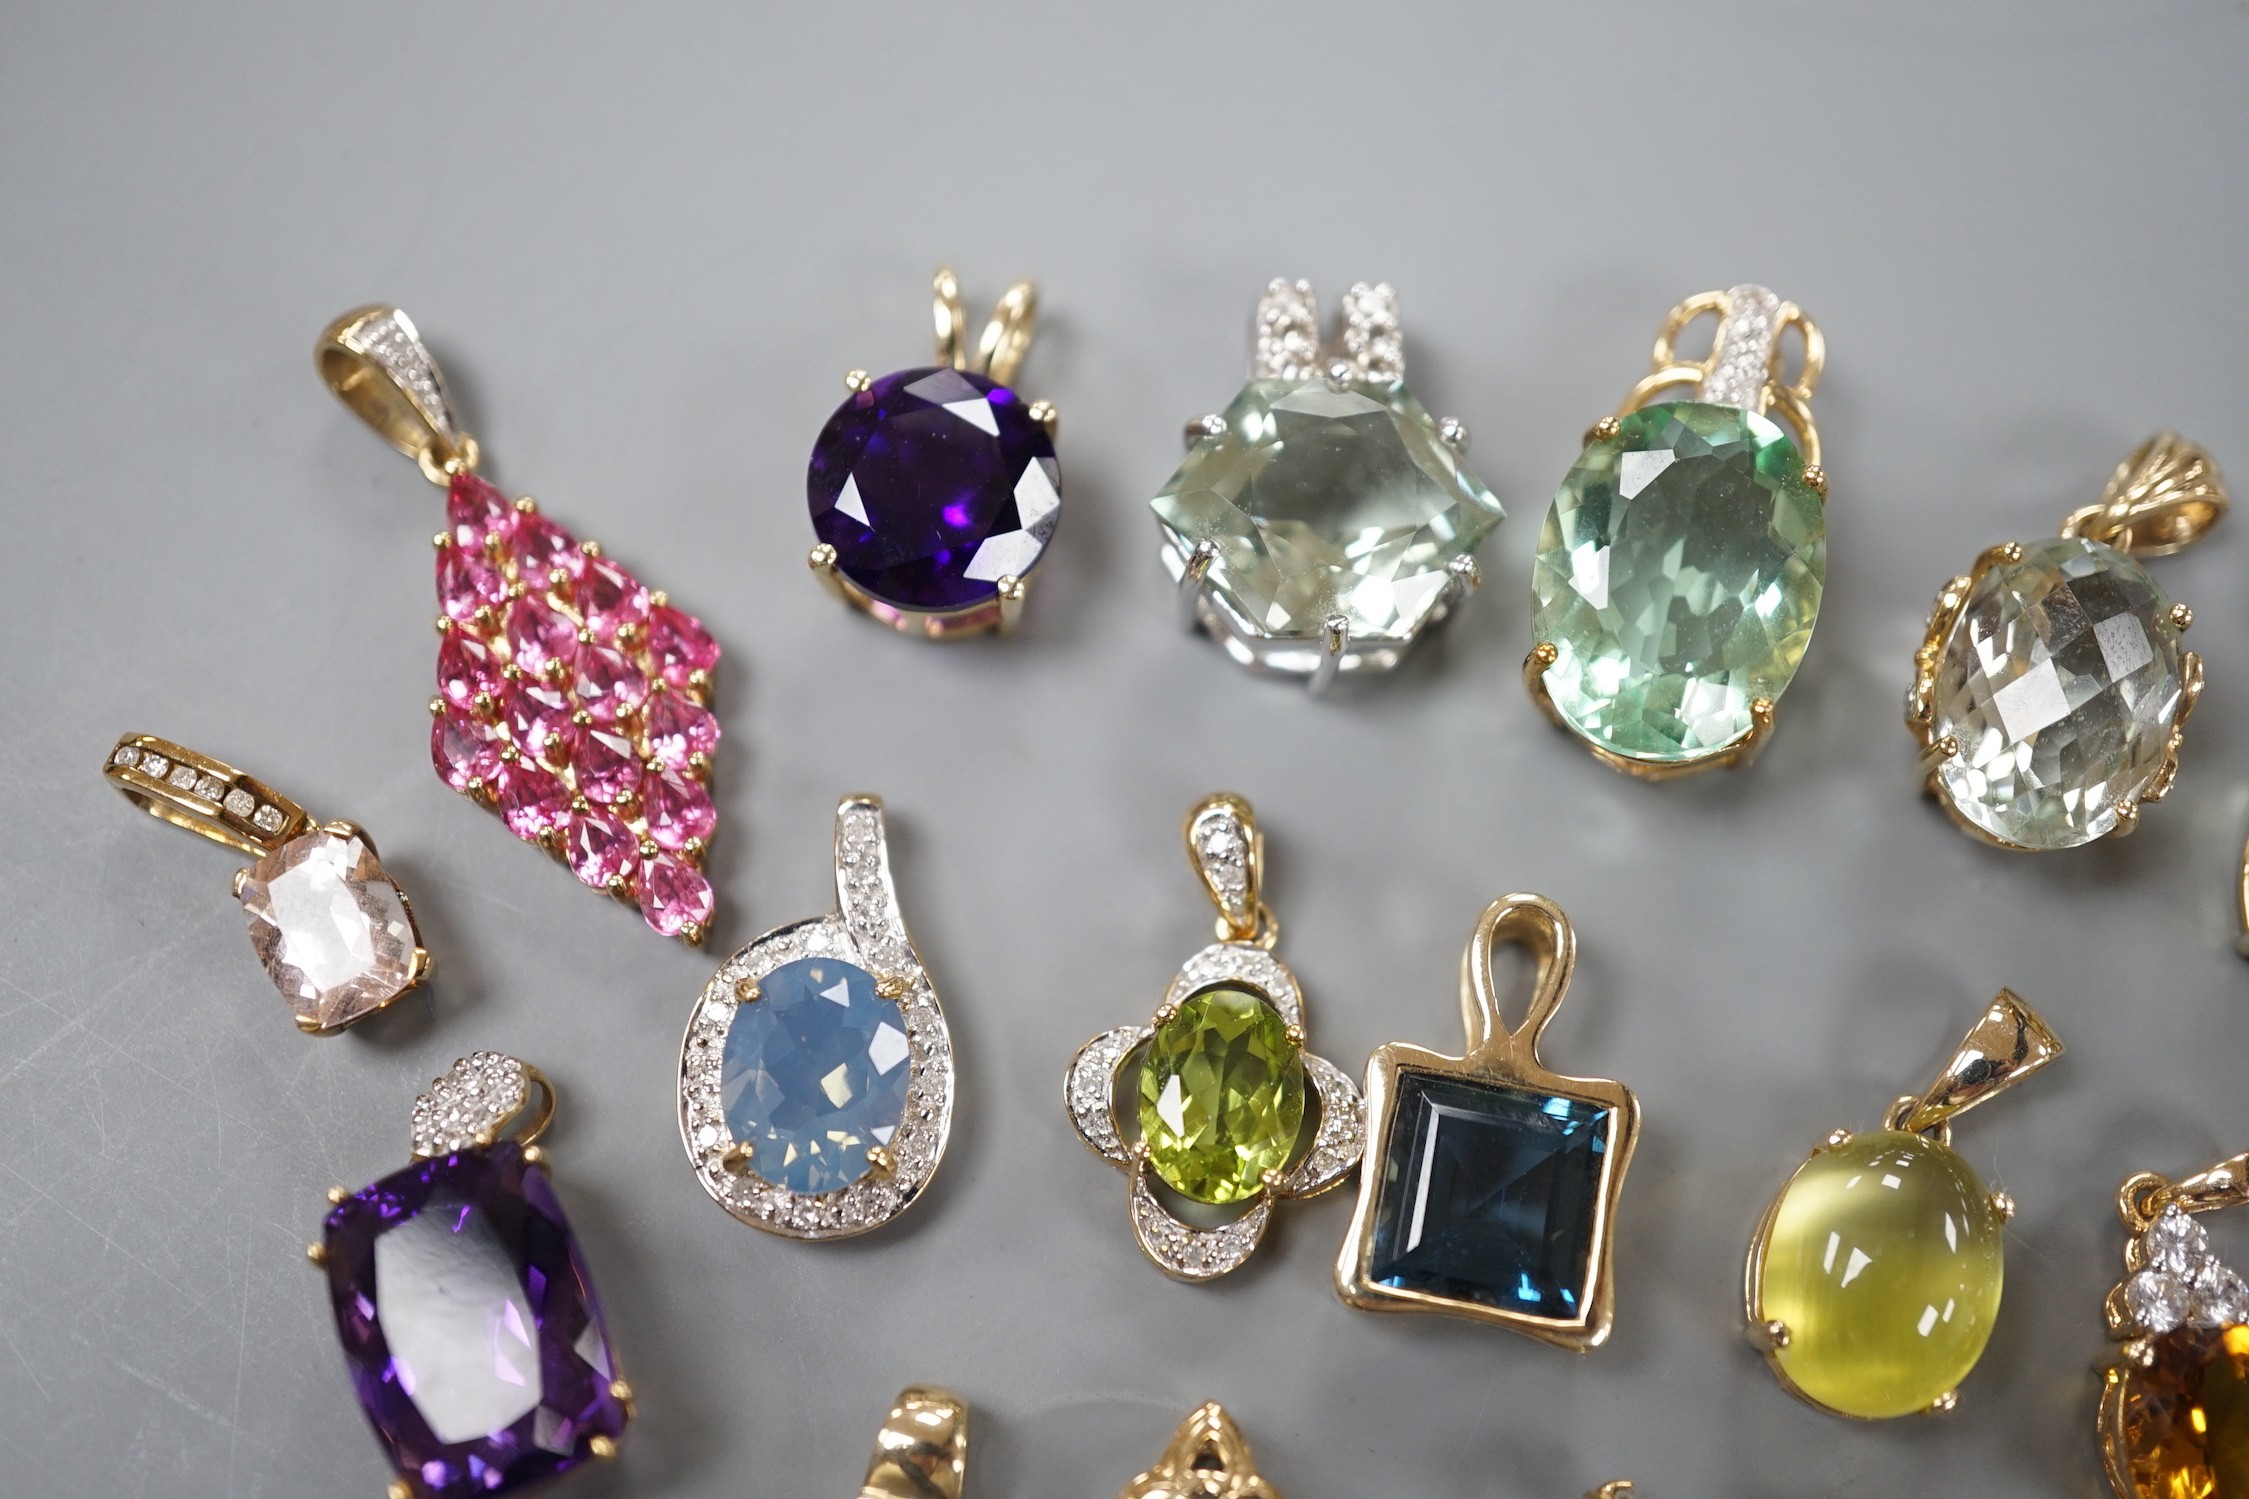 Twenty five assorted modern 9ct gold or 9k and gem set pendants, including amethyst and citrine, gross weight 54.7 grams.